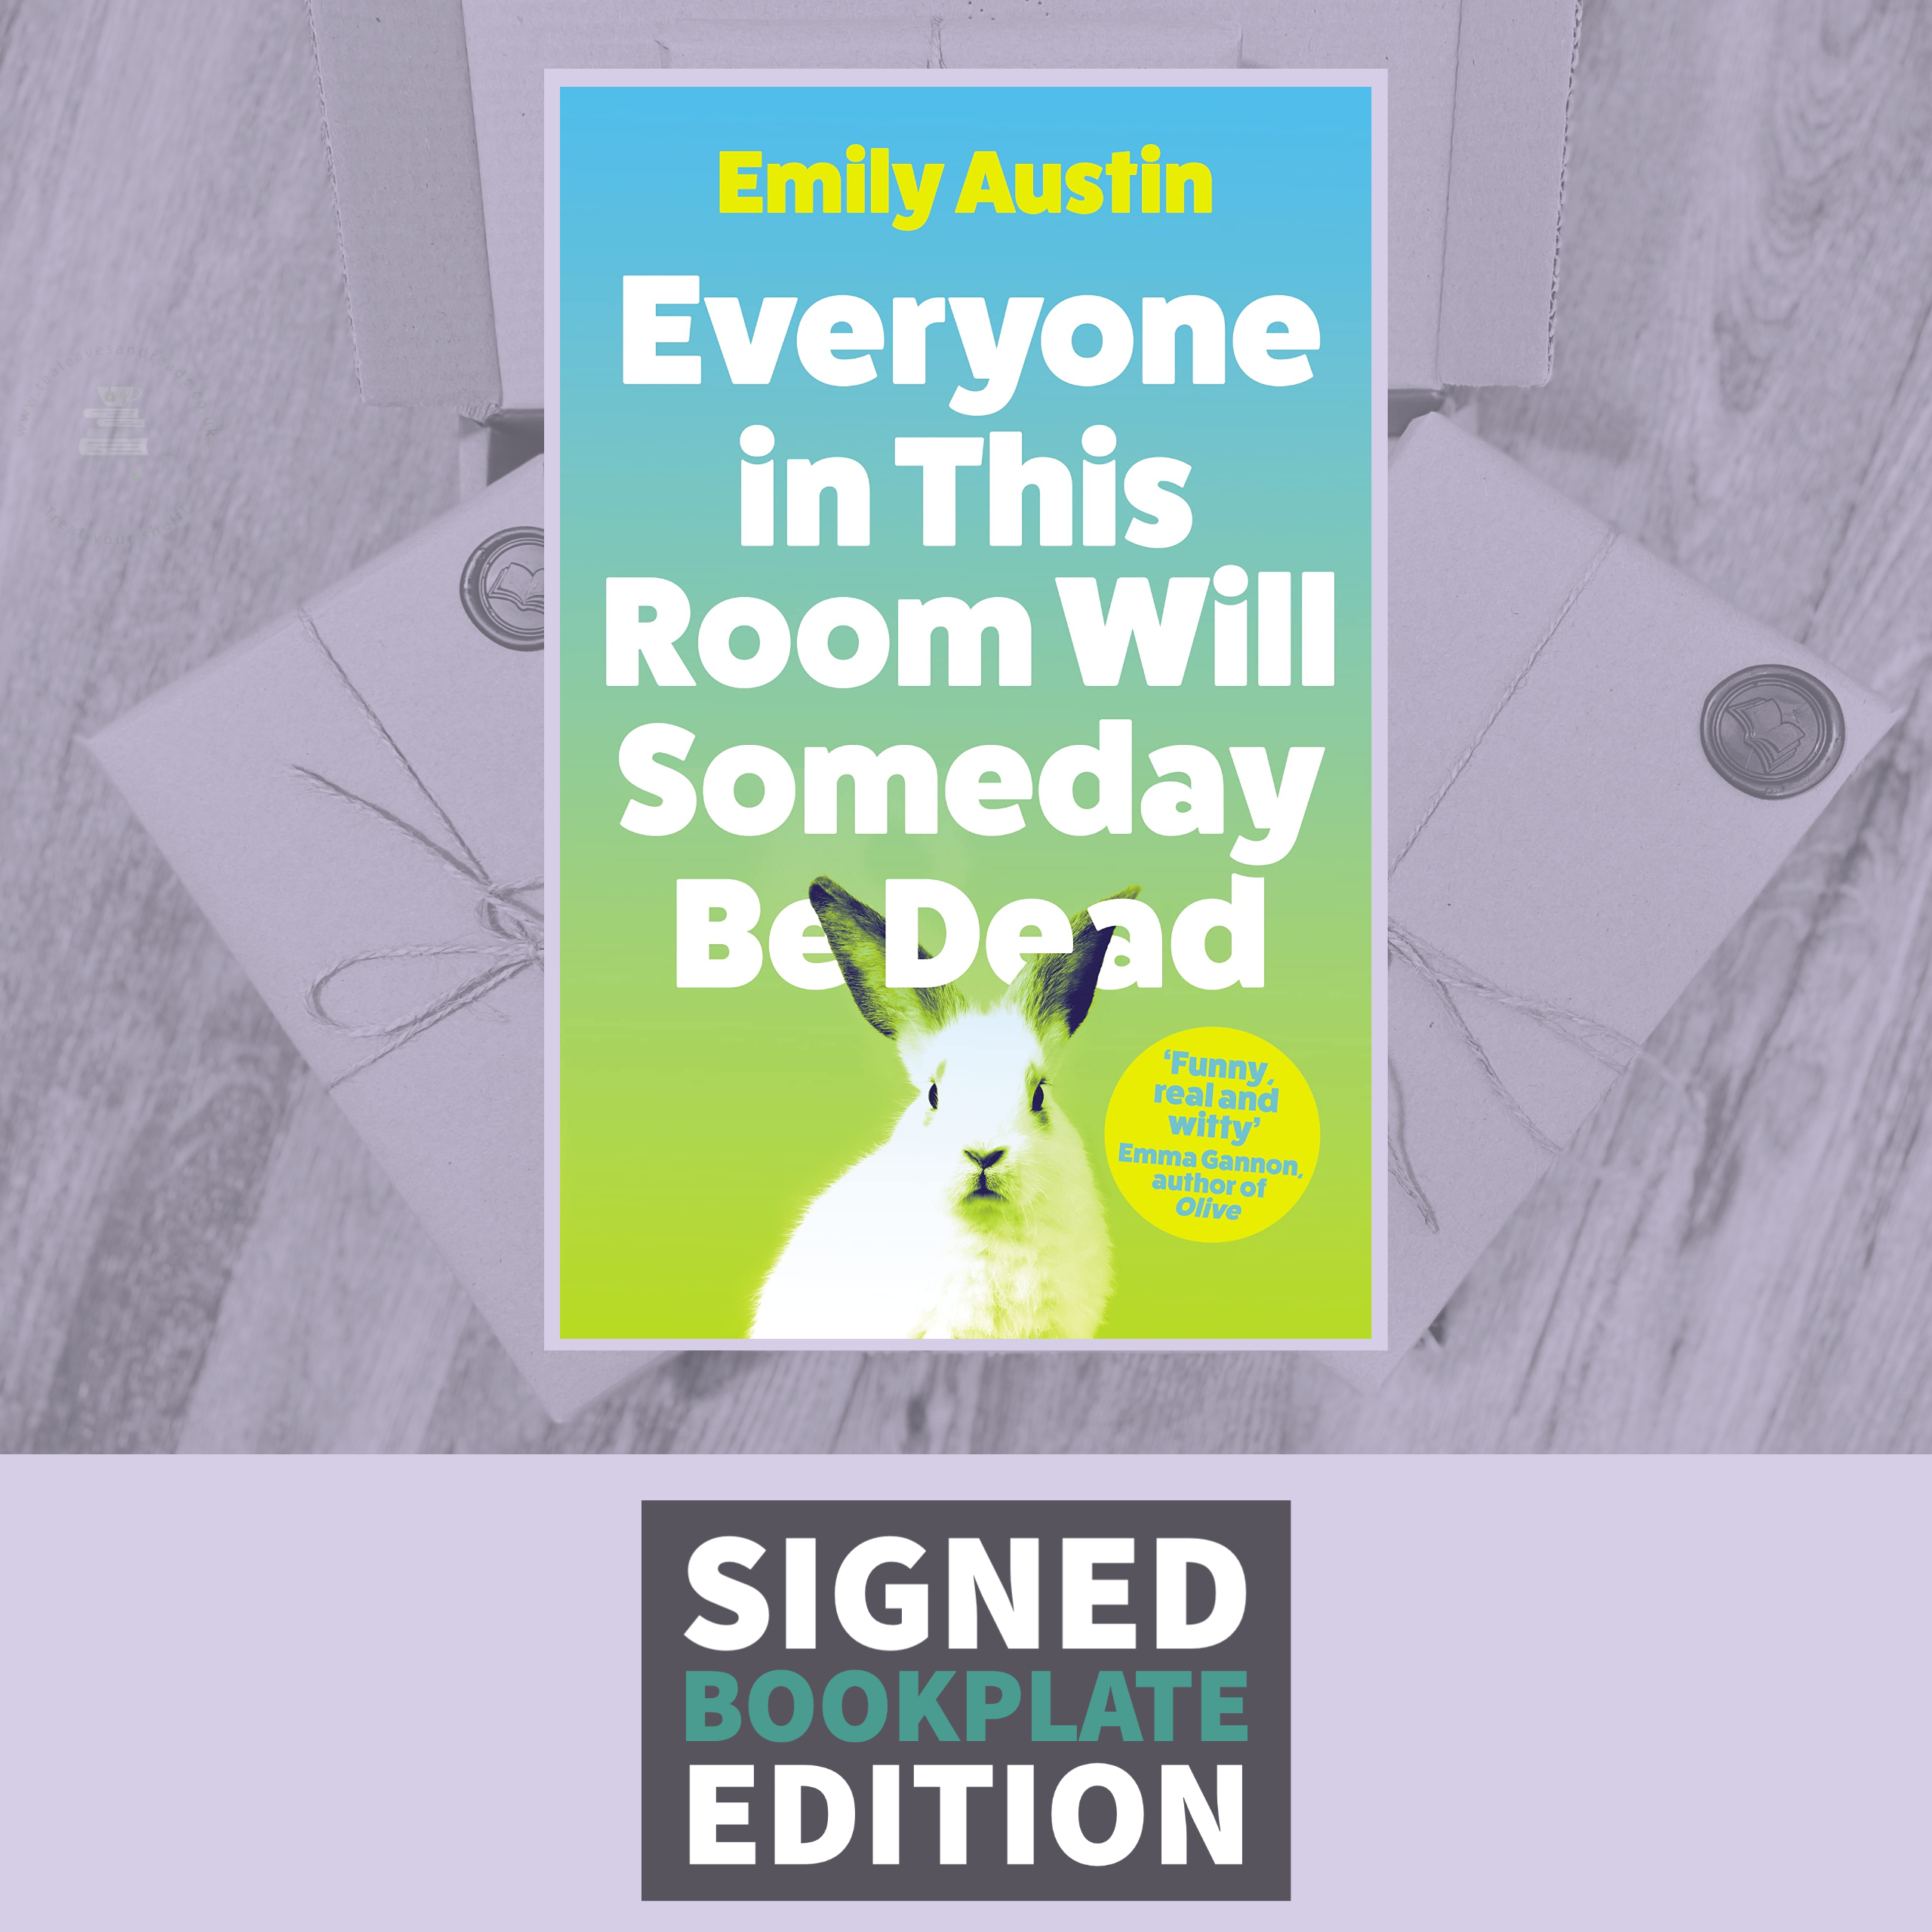 Everyone in This Room Will Someday be Dead by Emily Austin (signed  book-plate edition) – Tea Leaves & Reads